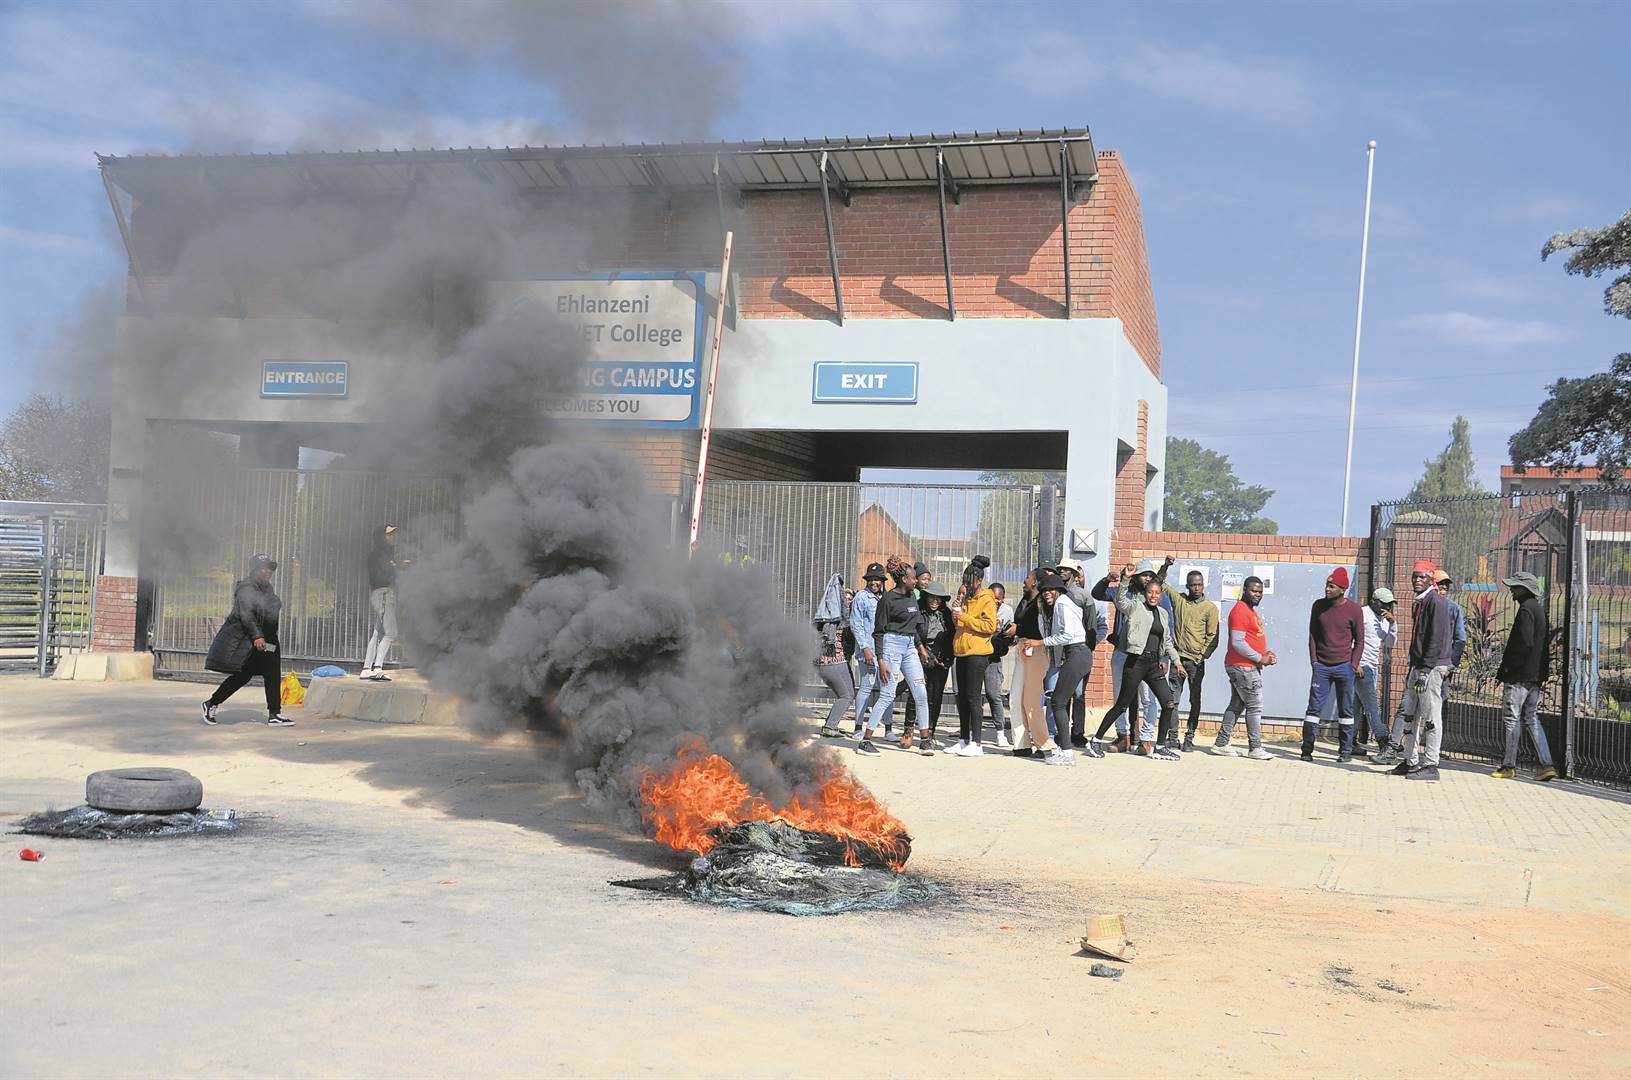 Fuming students protesting outside Ehlanzeni TVET College in Acornhoek.           Photo by Oris Mnisi